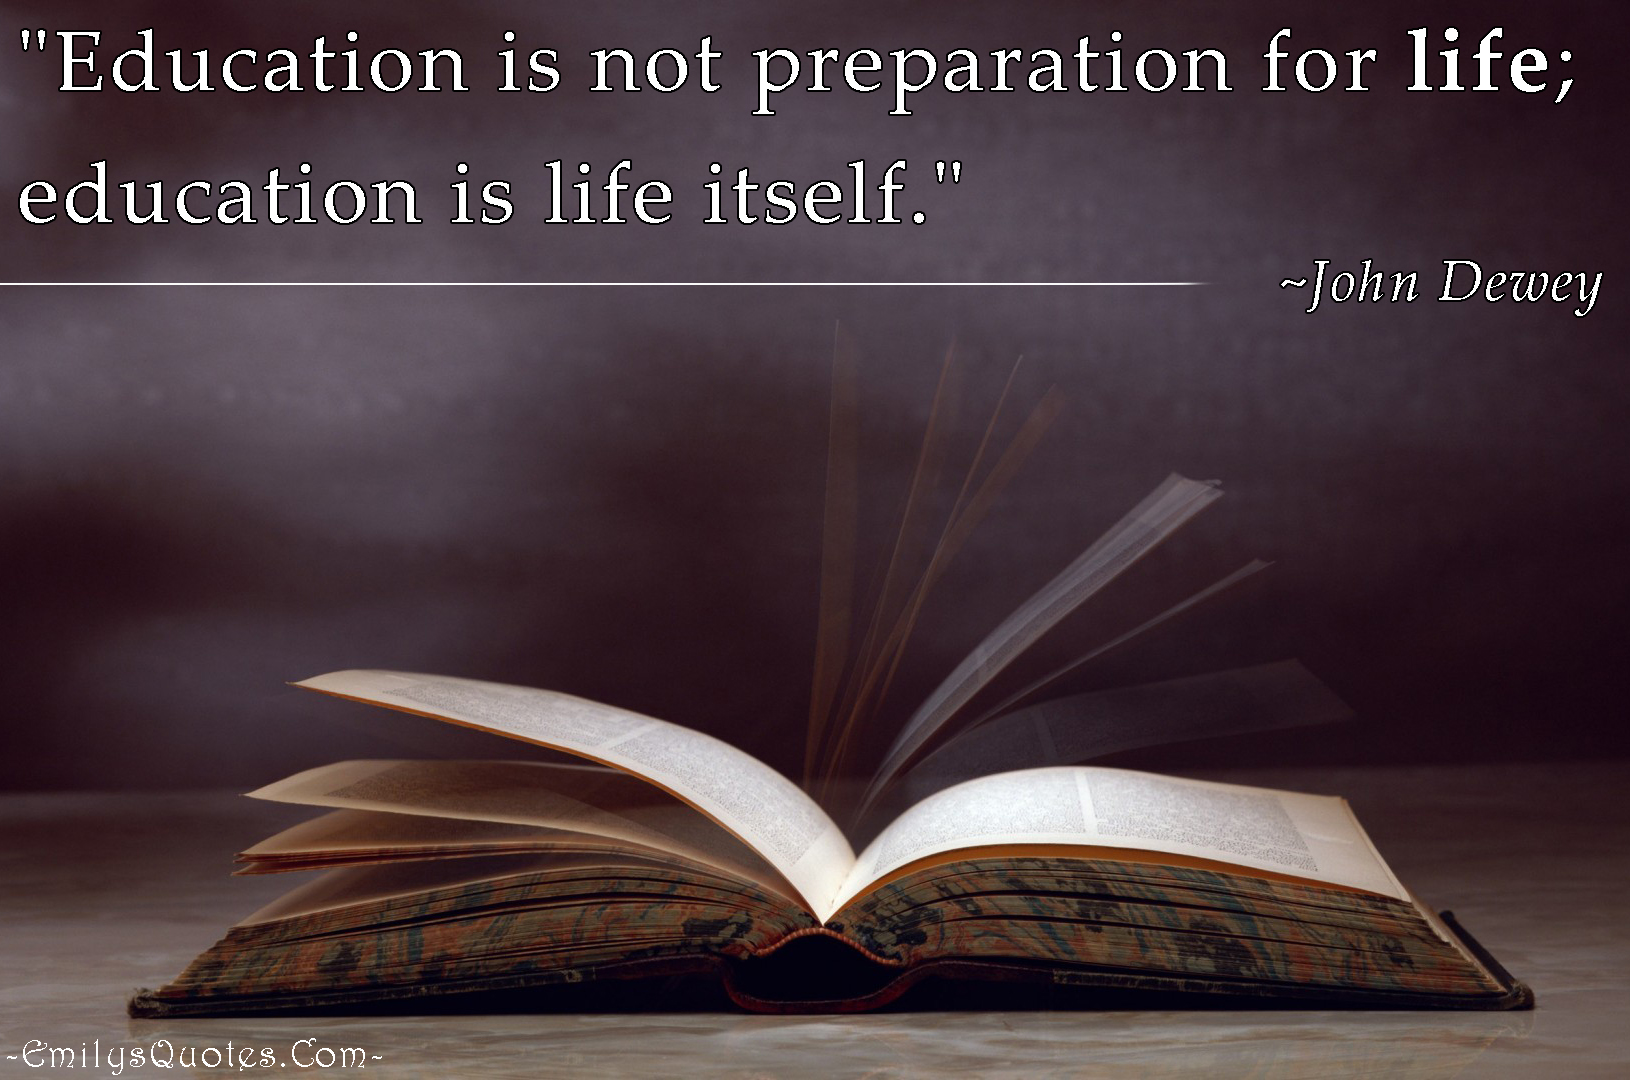 Education is not preparation for life; education is life itself